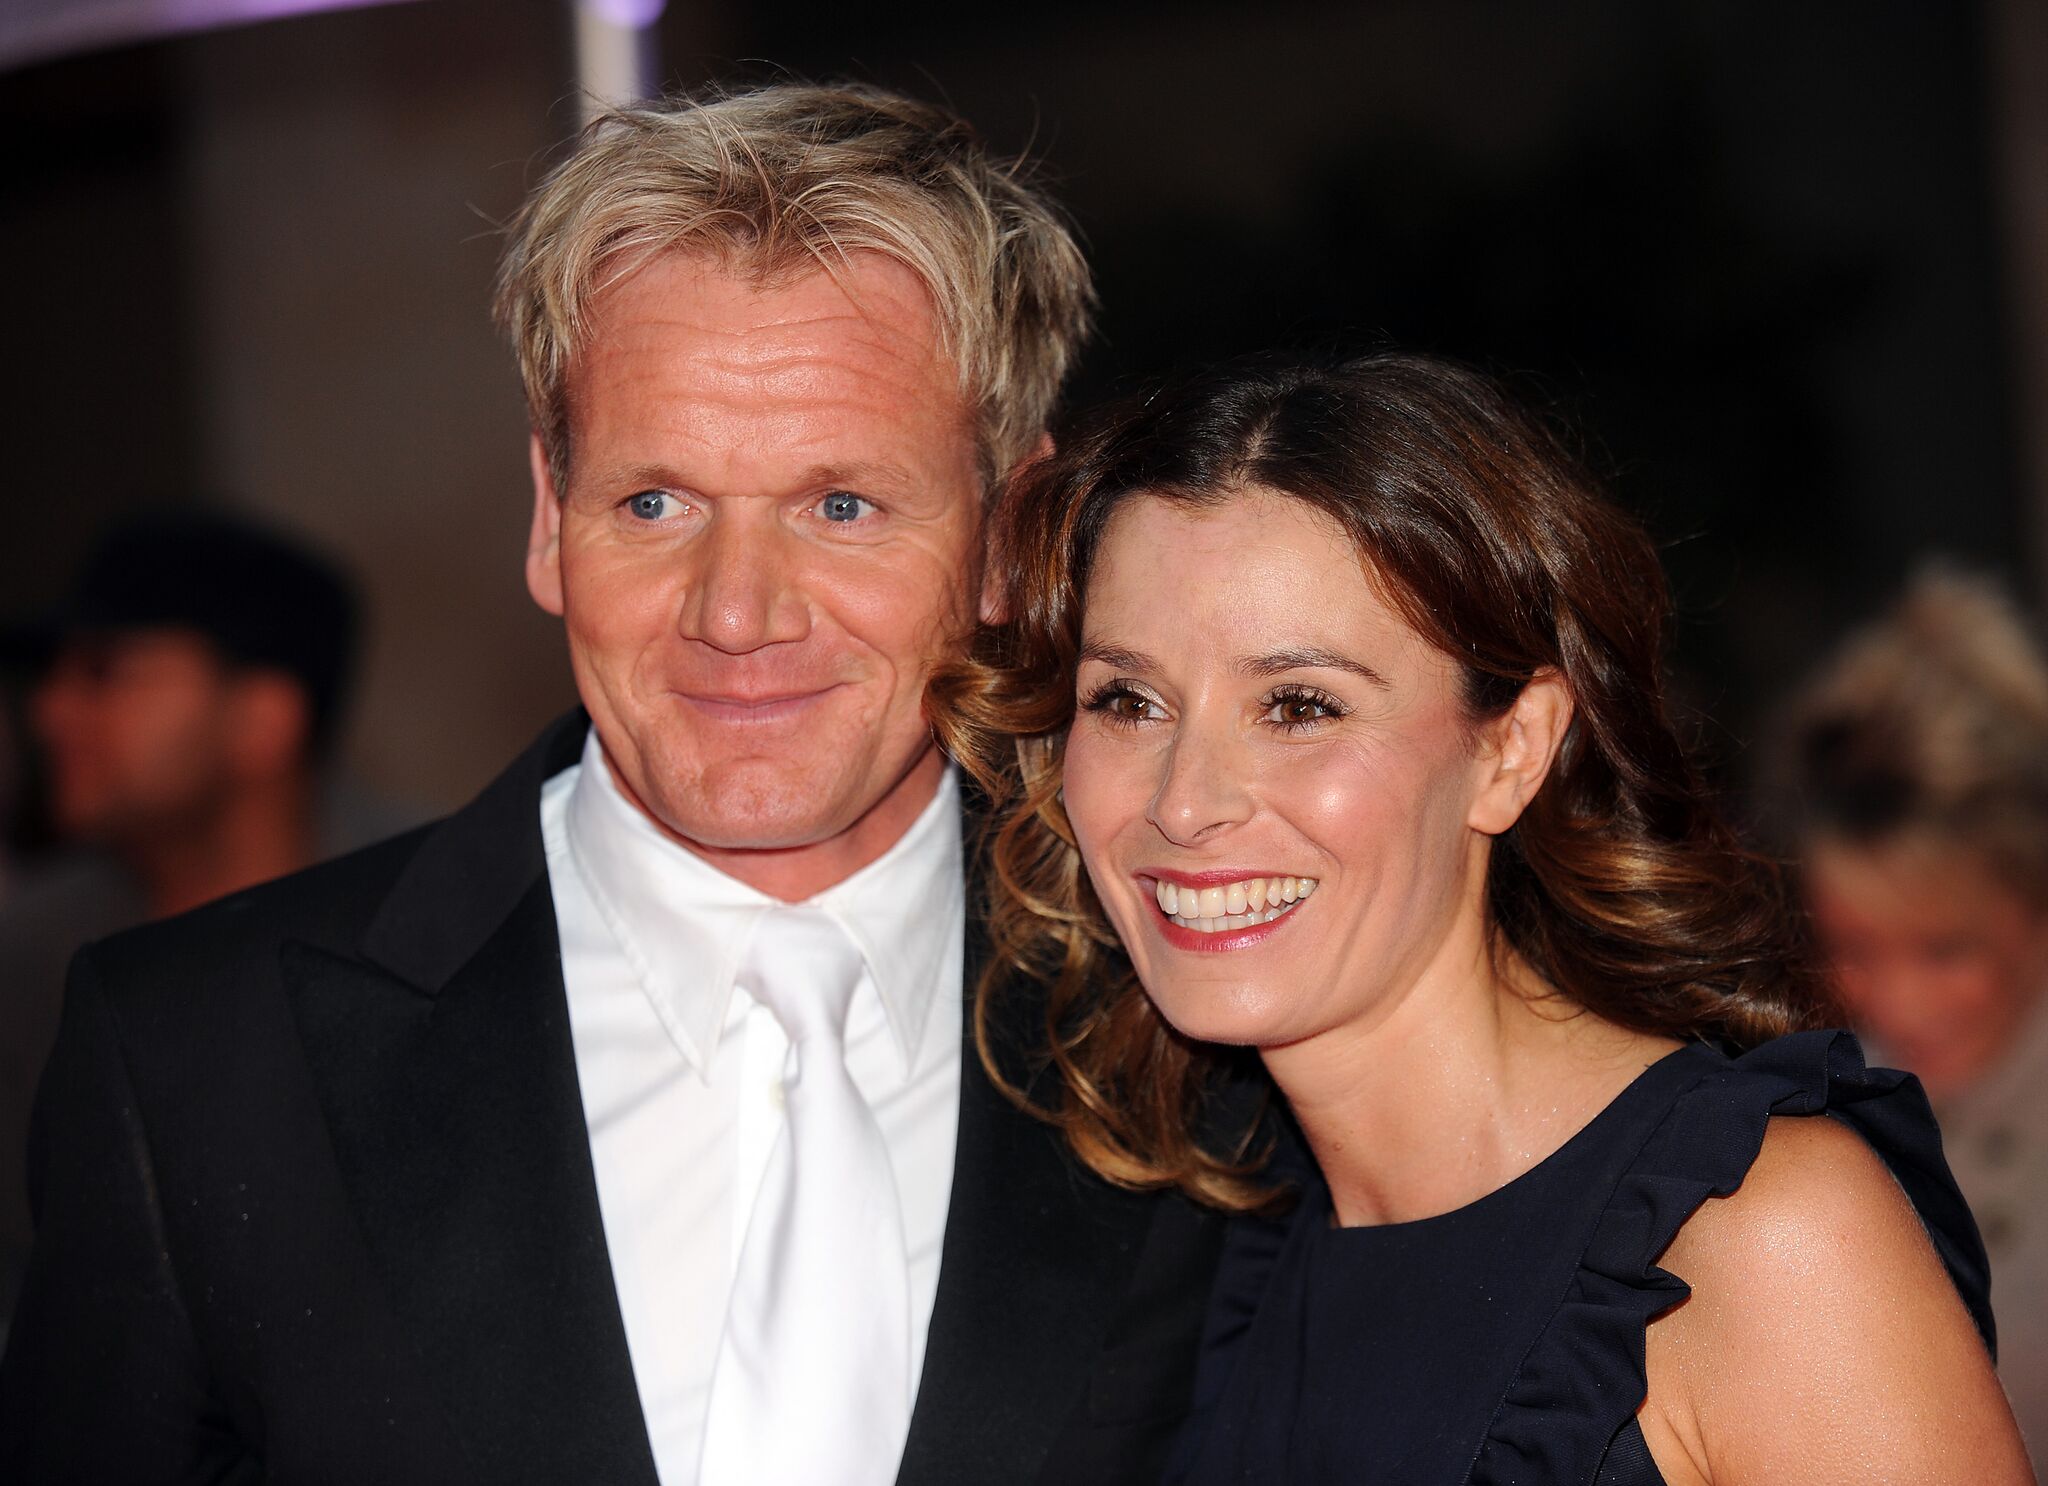  Gordon Ramsay and his wife Tanya Ramsay arrive for the Daily Mirror's Pride Of Britain Awards 2009 | Getty Images